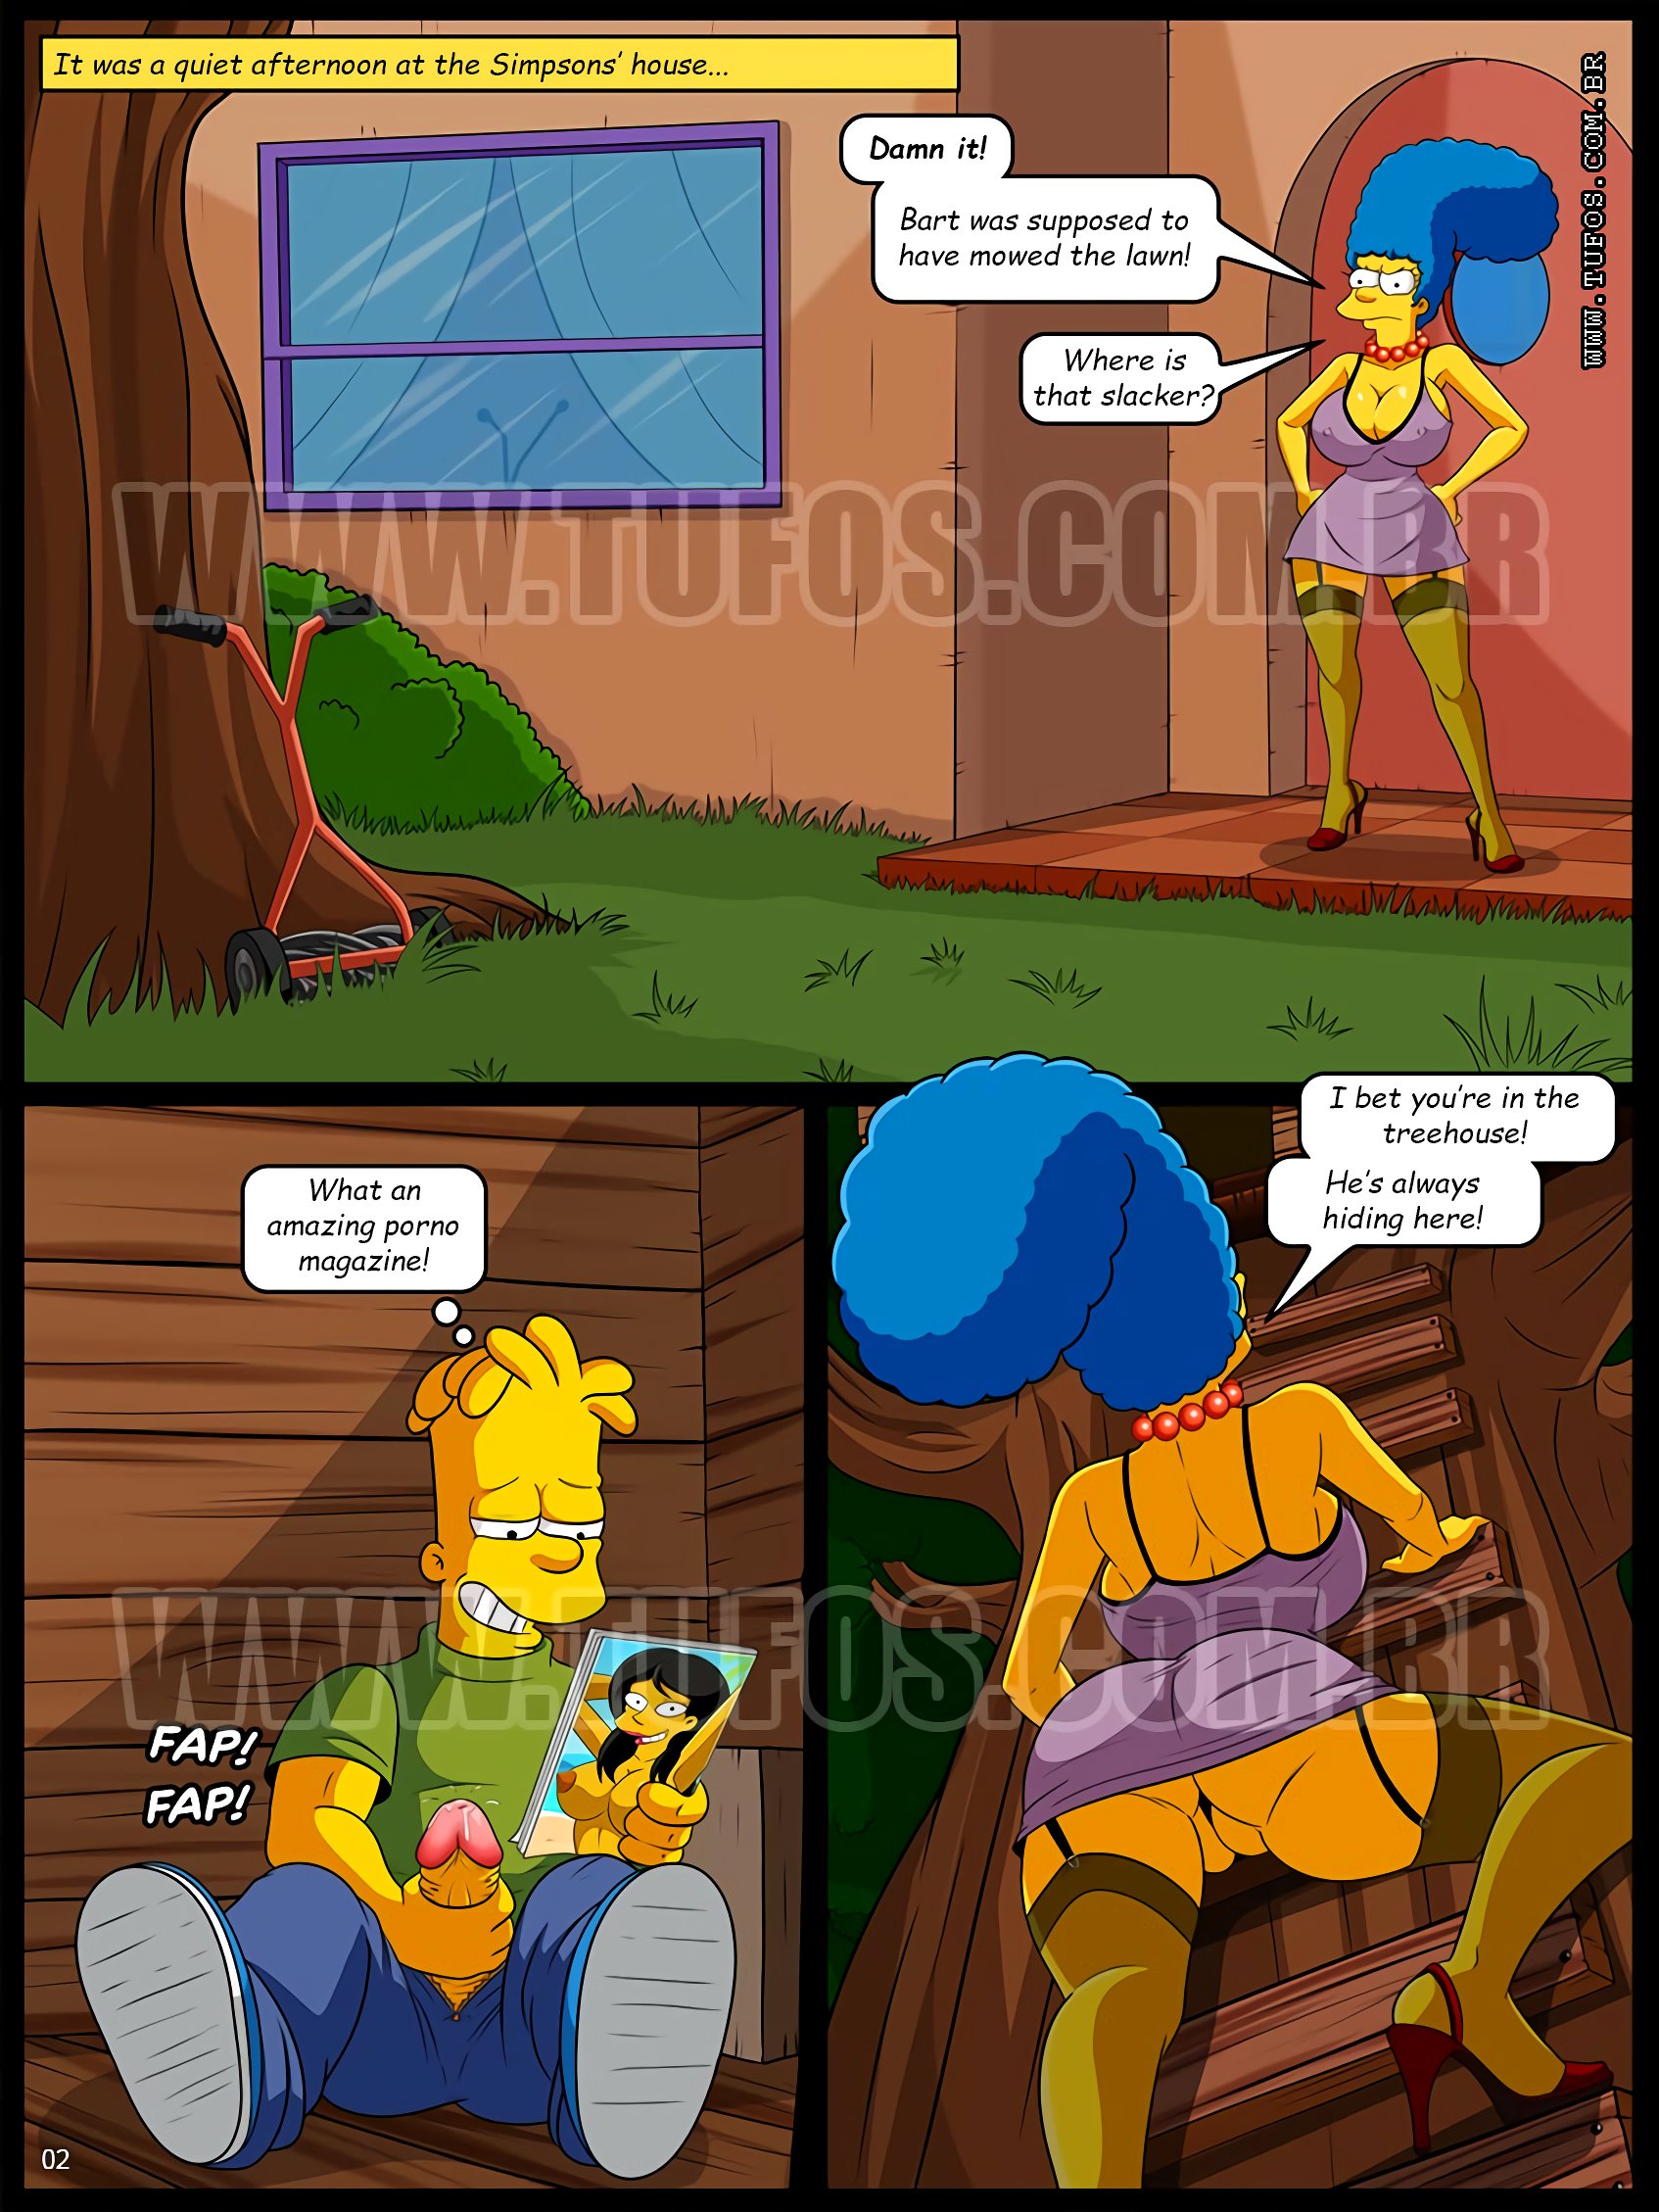 1694px x 2258px - The simpsons in climbing the tree house english porn comics â¤ï¸ Best adult  photos at comics.theothertentacle.com